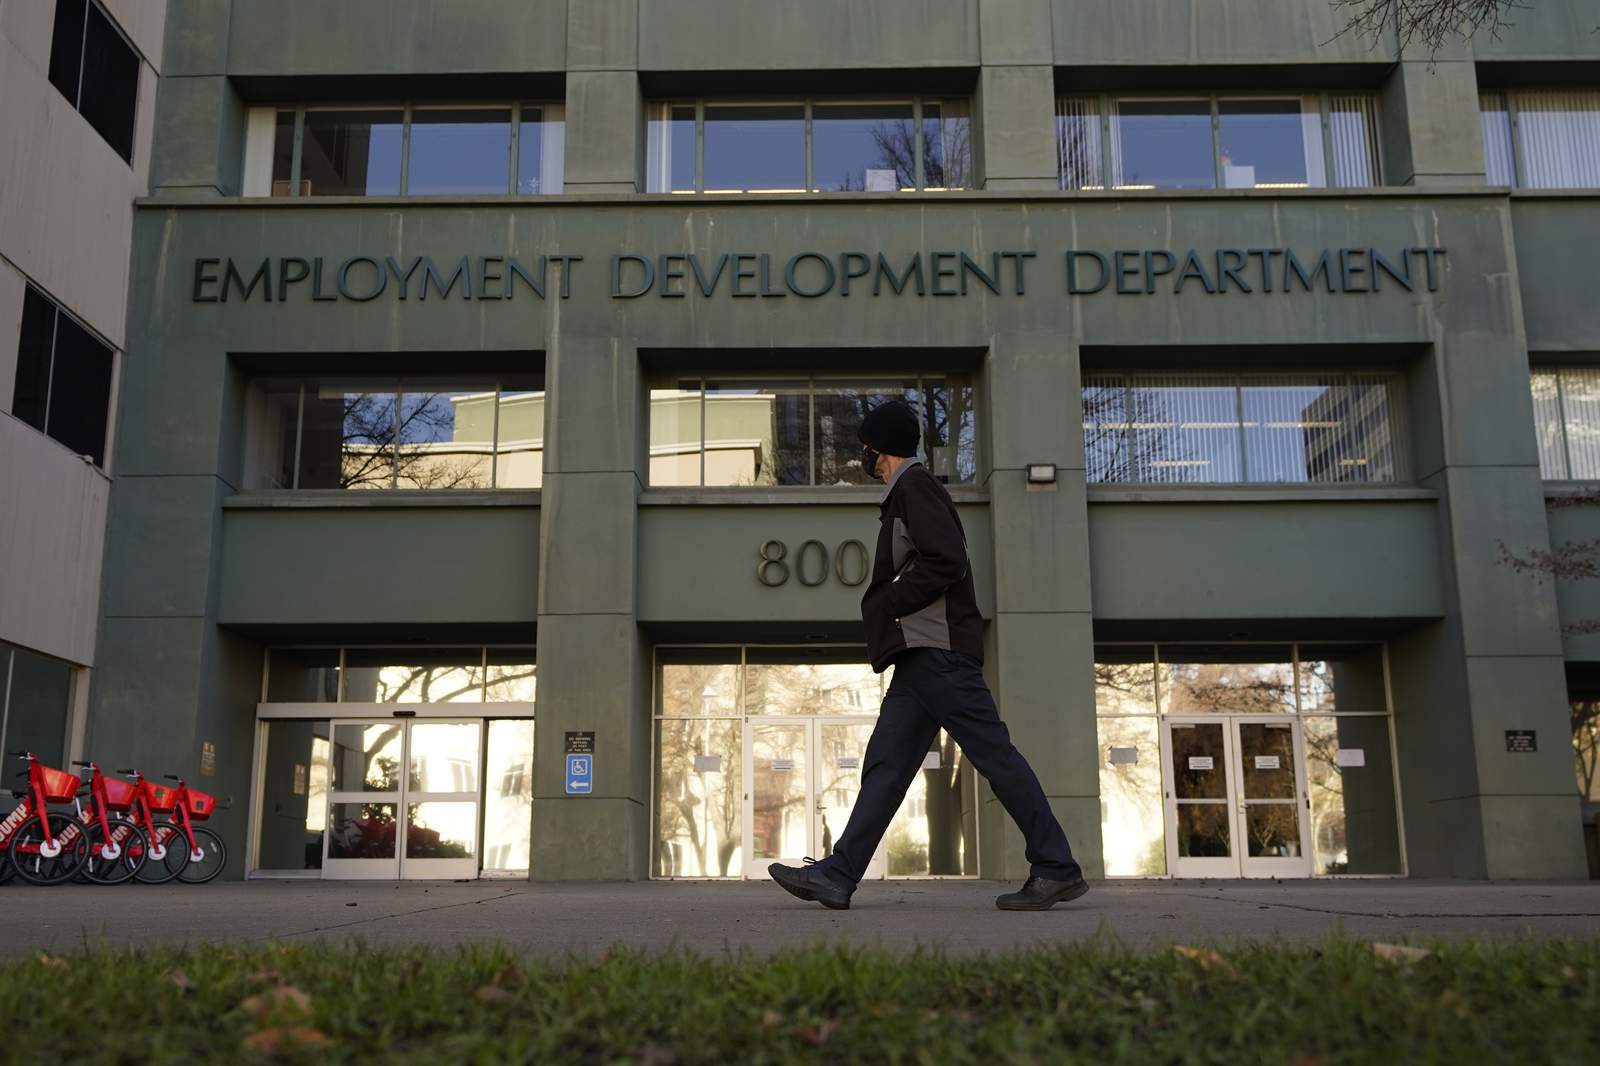 Tax forms help reveal extent of unemployment fraud in US